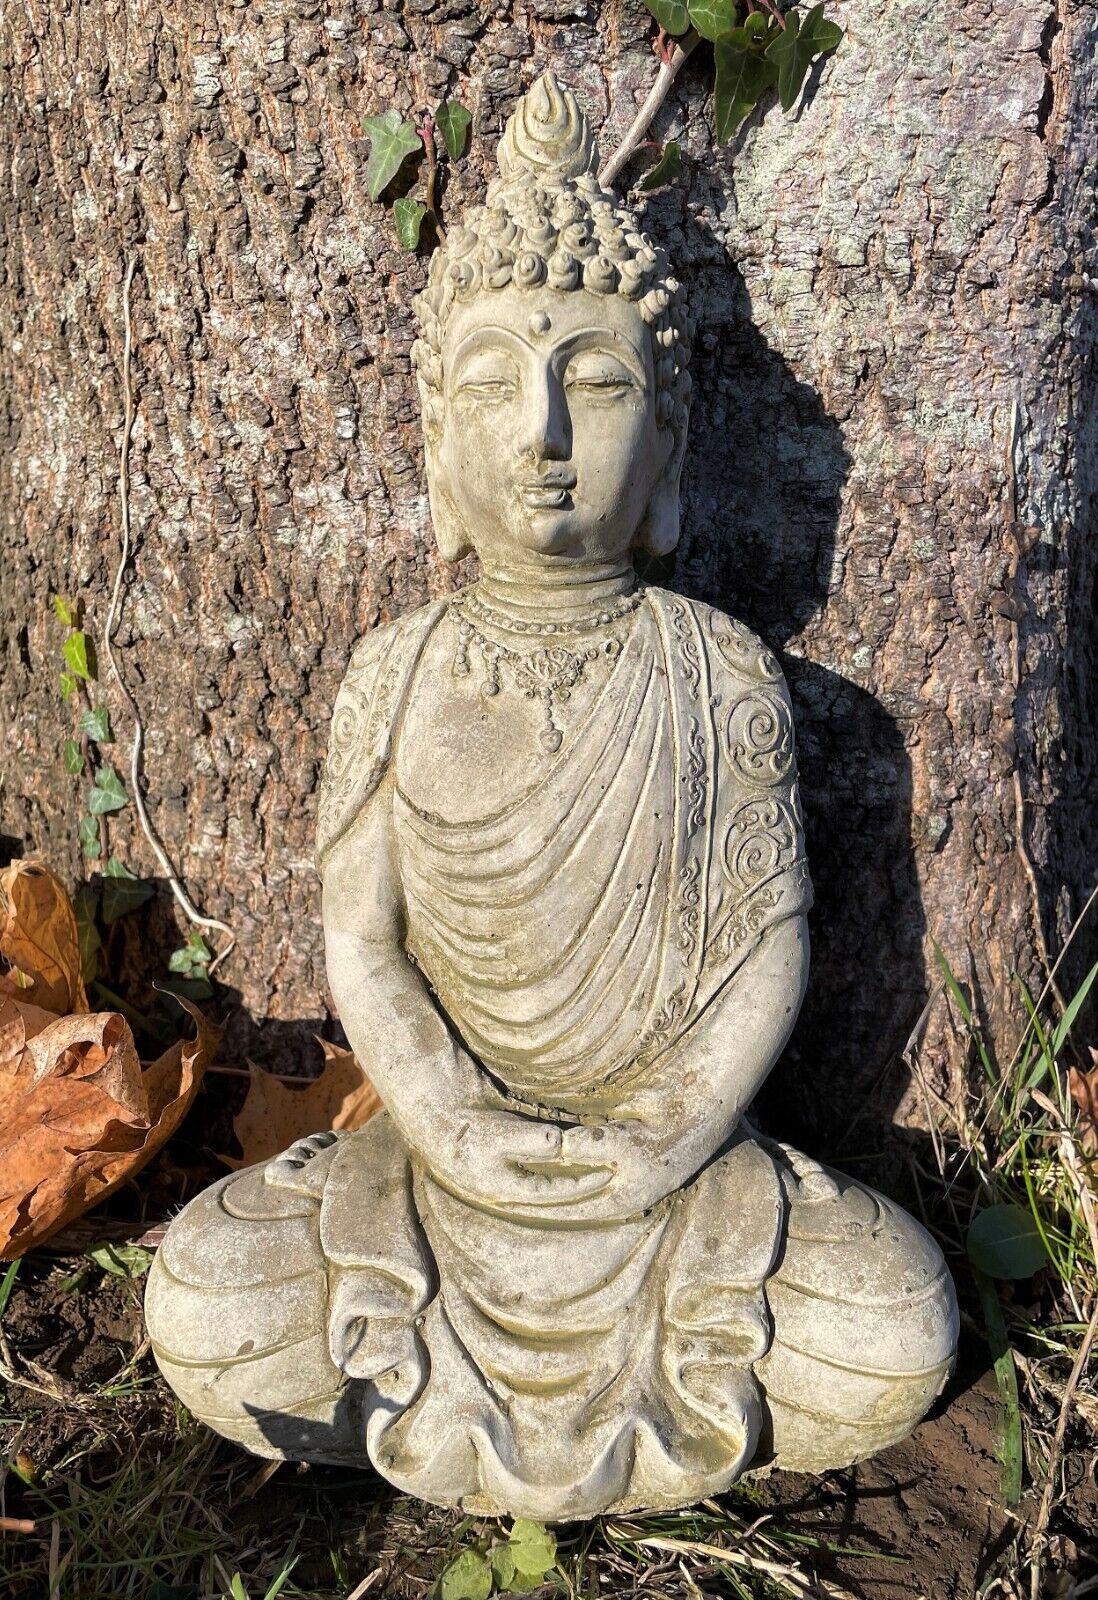 A peaceful buddha with flowing robes in meditation. Situated in a British garden with a tree in background